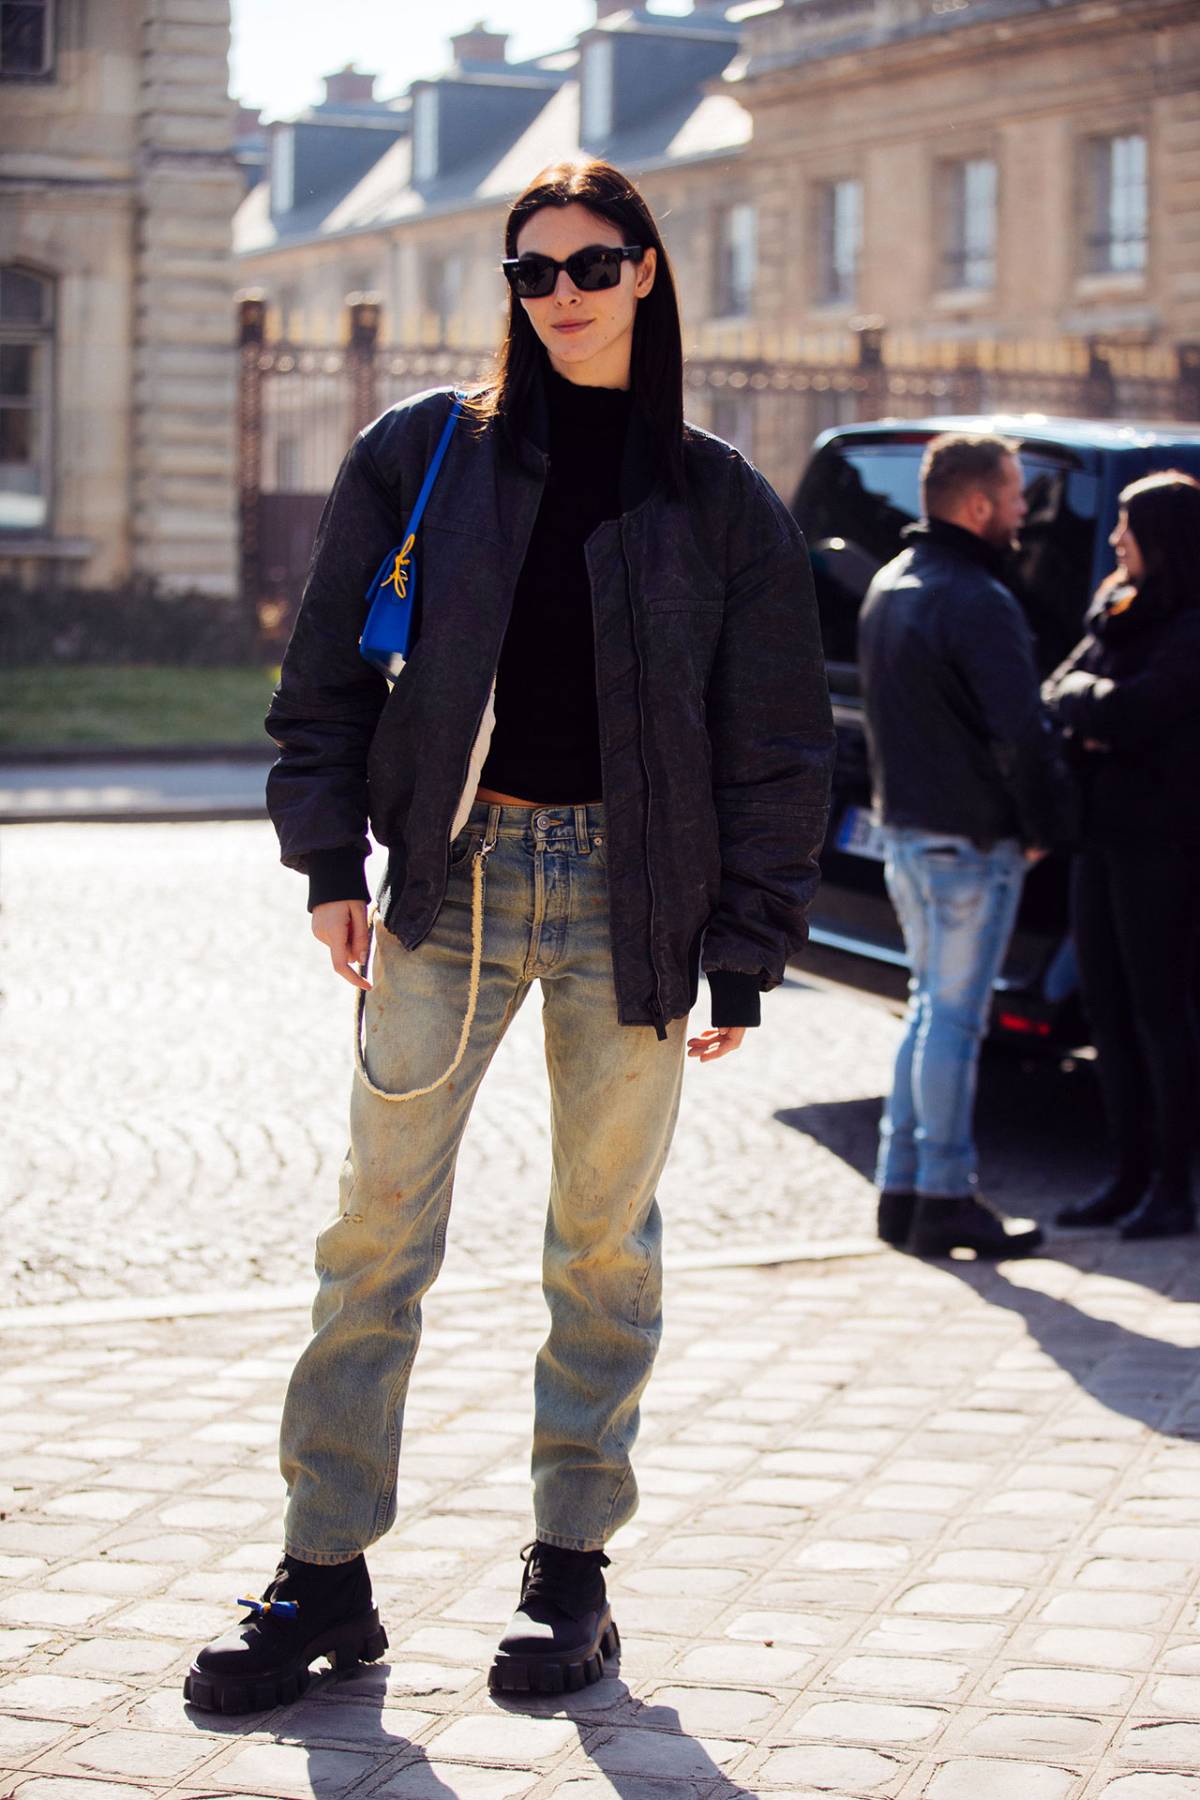 Vittoria Ceretti Street Style at Paris Fashion Week Fall-Winter 2022 by Melodie Jeng